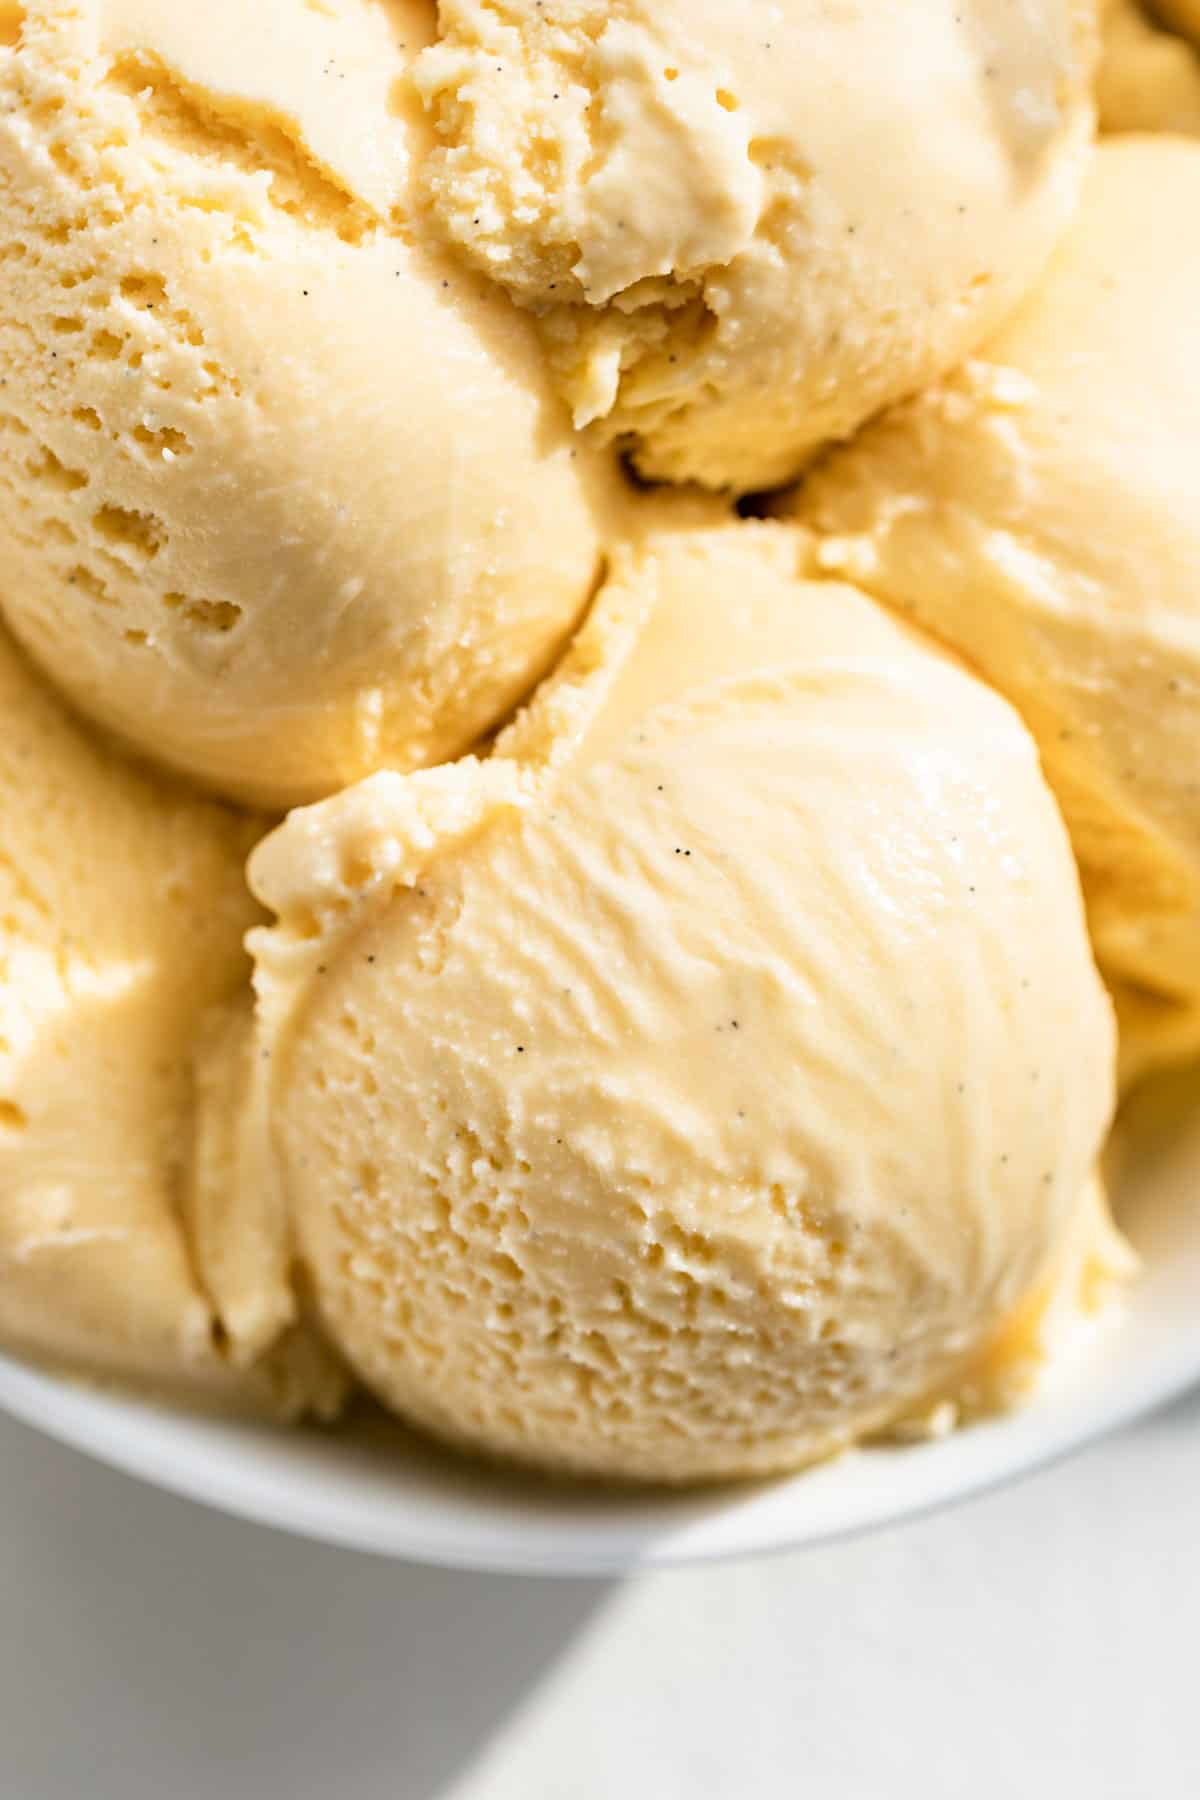 Close view of scoops of vanilla ice cream in a white bowl.